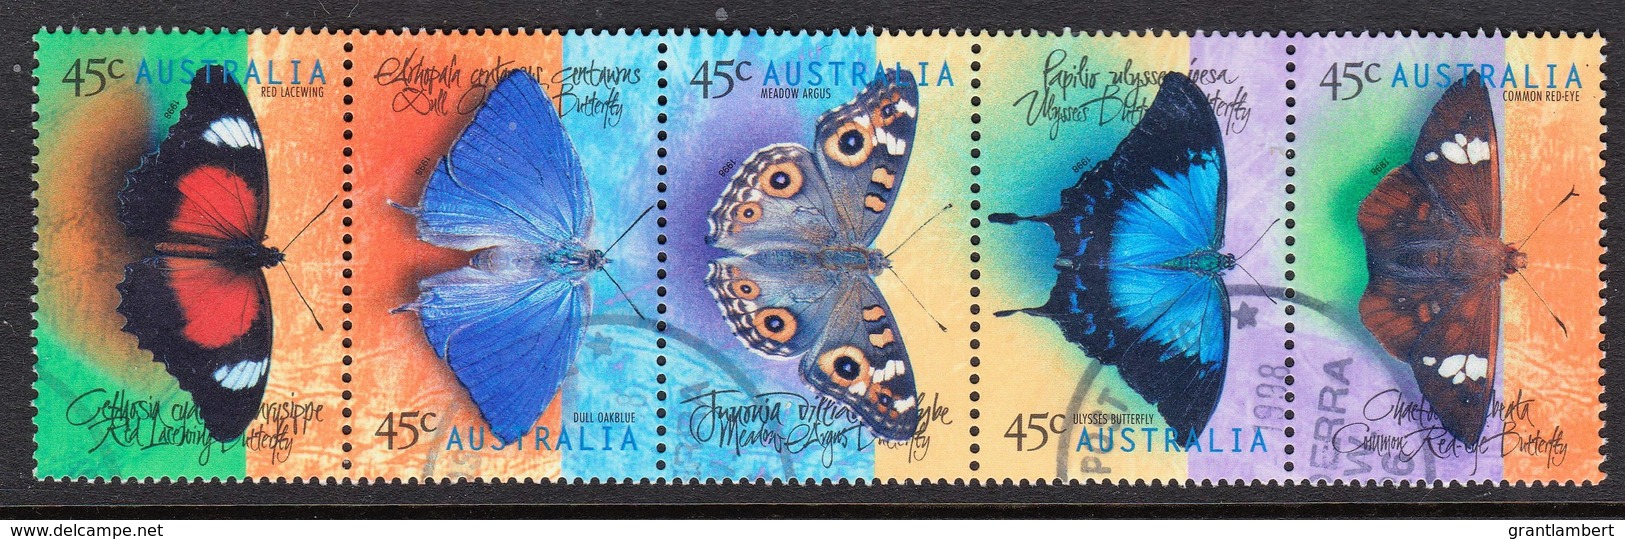 Australia 1998 Butterflies Strip Of 5 Used - Used Stamps